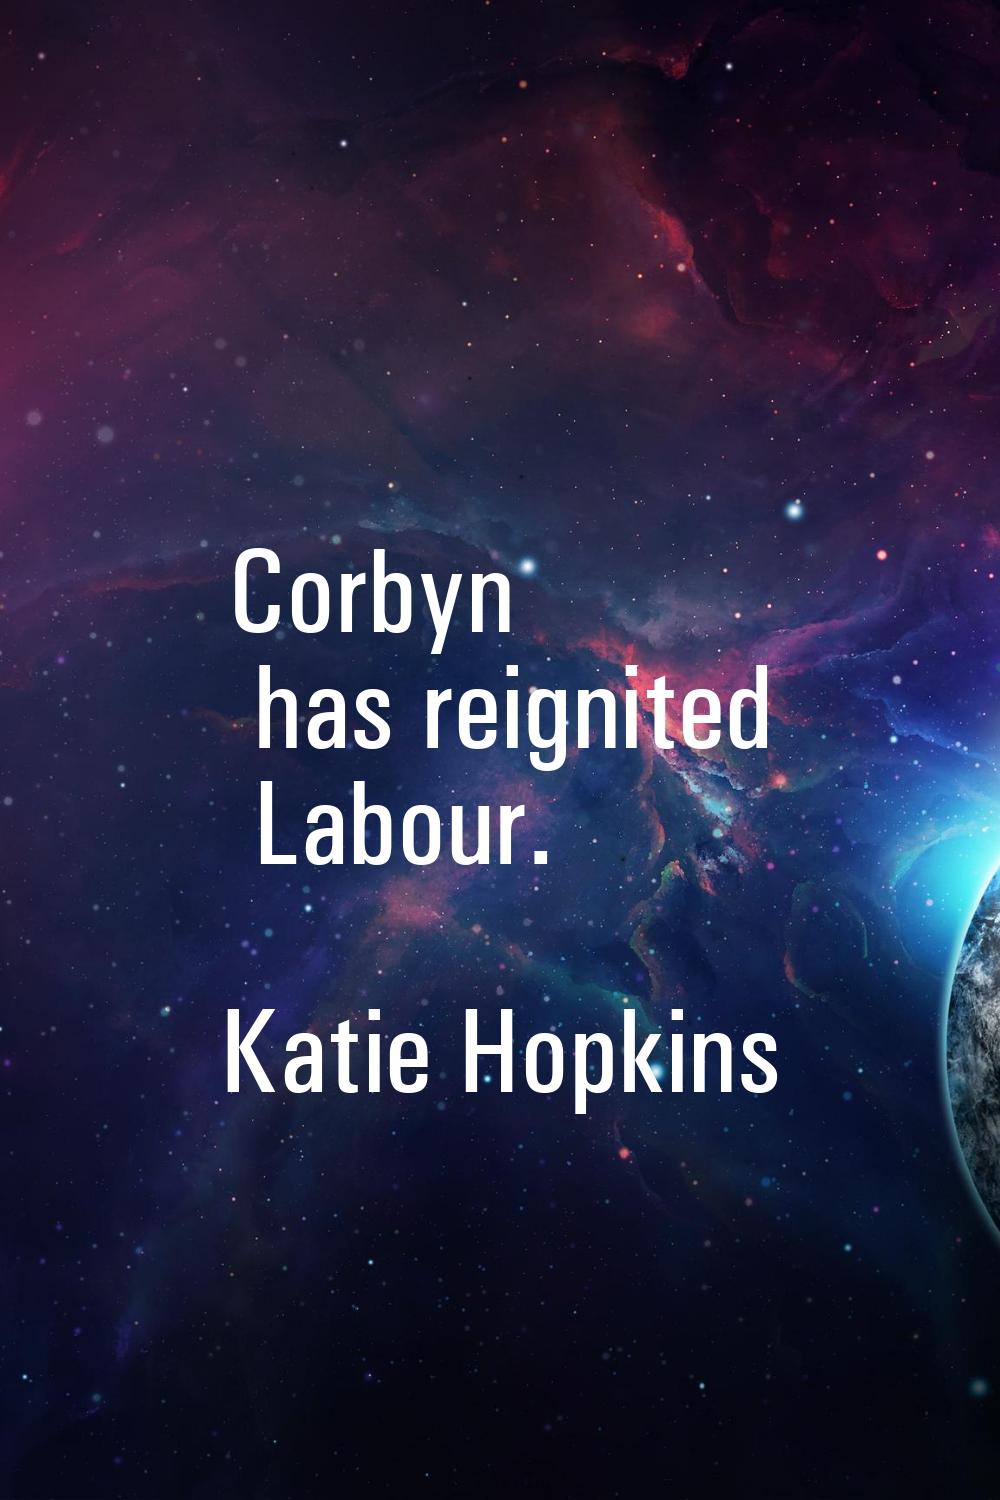 Corbyn has reignited Labour.